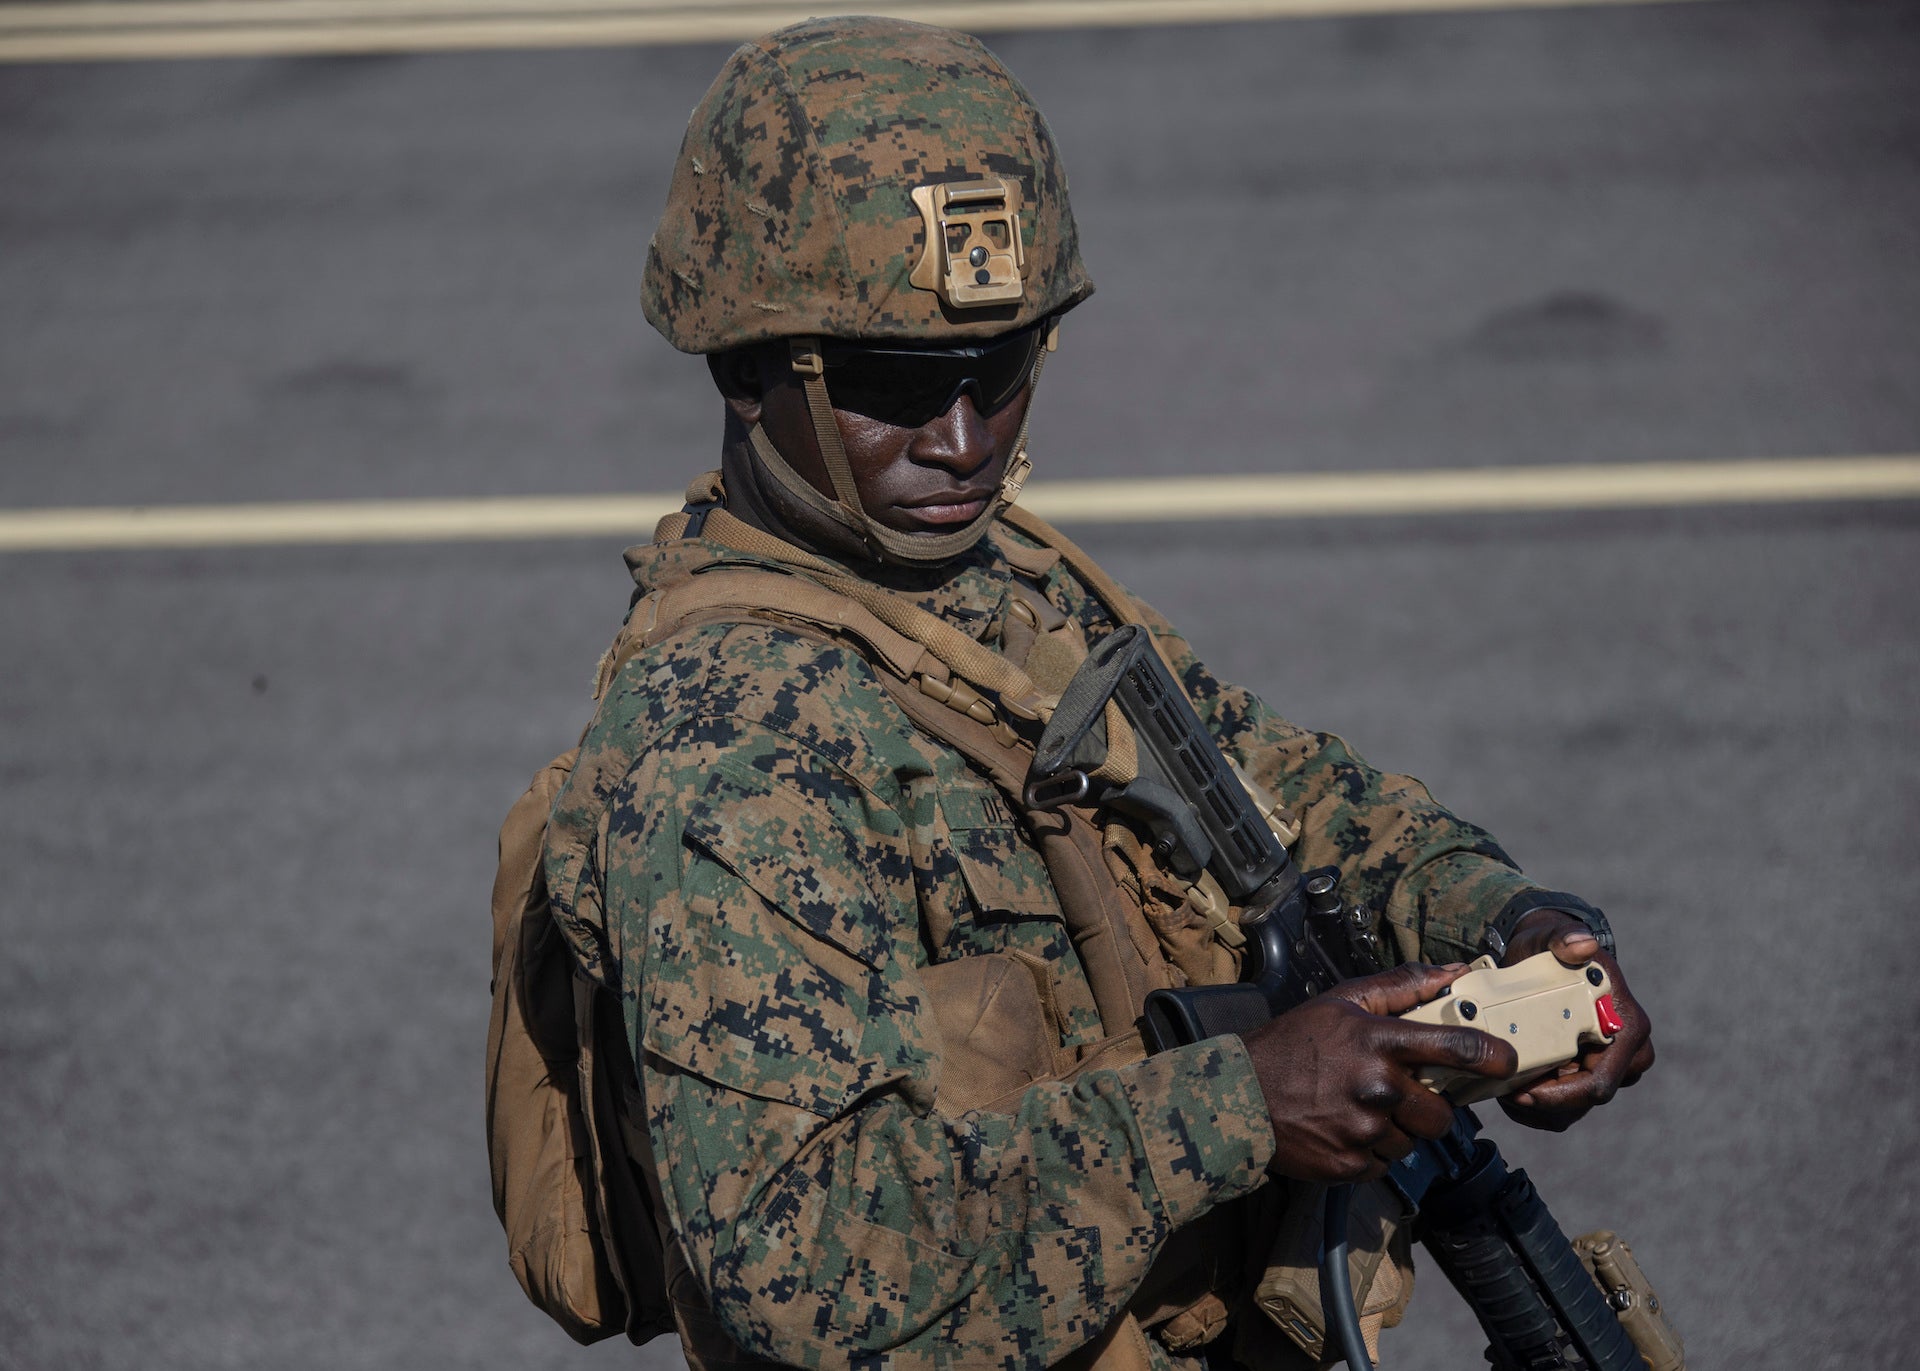 Pfc. Guerby Destine, 22, number two cannon cocker with 1st Battalion, 12th Marines and a Westbury, N.Y., native, drives a Navy Marine Expeditionary Ship Interdiction System launcher aboard Pacific Missile Range Facility Barking Sands, Hawaii, Aug. 15, 2021. The Marines of 1/12 struck a naval target ship with two Naval Strike Missiles after sensing and targeting the vessel from their fires expeditionary advanced base while participating in Large Scale Exercise 2021. The exercise allowed Marines to support distributed maritime operations by providing expeditionary advanced base operations and littoral operations in a contested environment. More than 25,000 Marines and sailors took part in LSE 2021 from five numbered fleets and all three Marine Expeditionary Forces. (U.S. Marine Corps photo by Cpl. Luke Cohen, released)